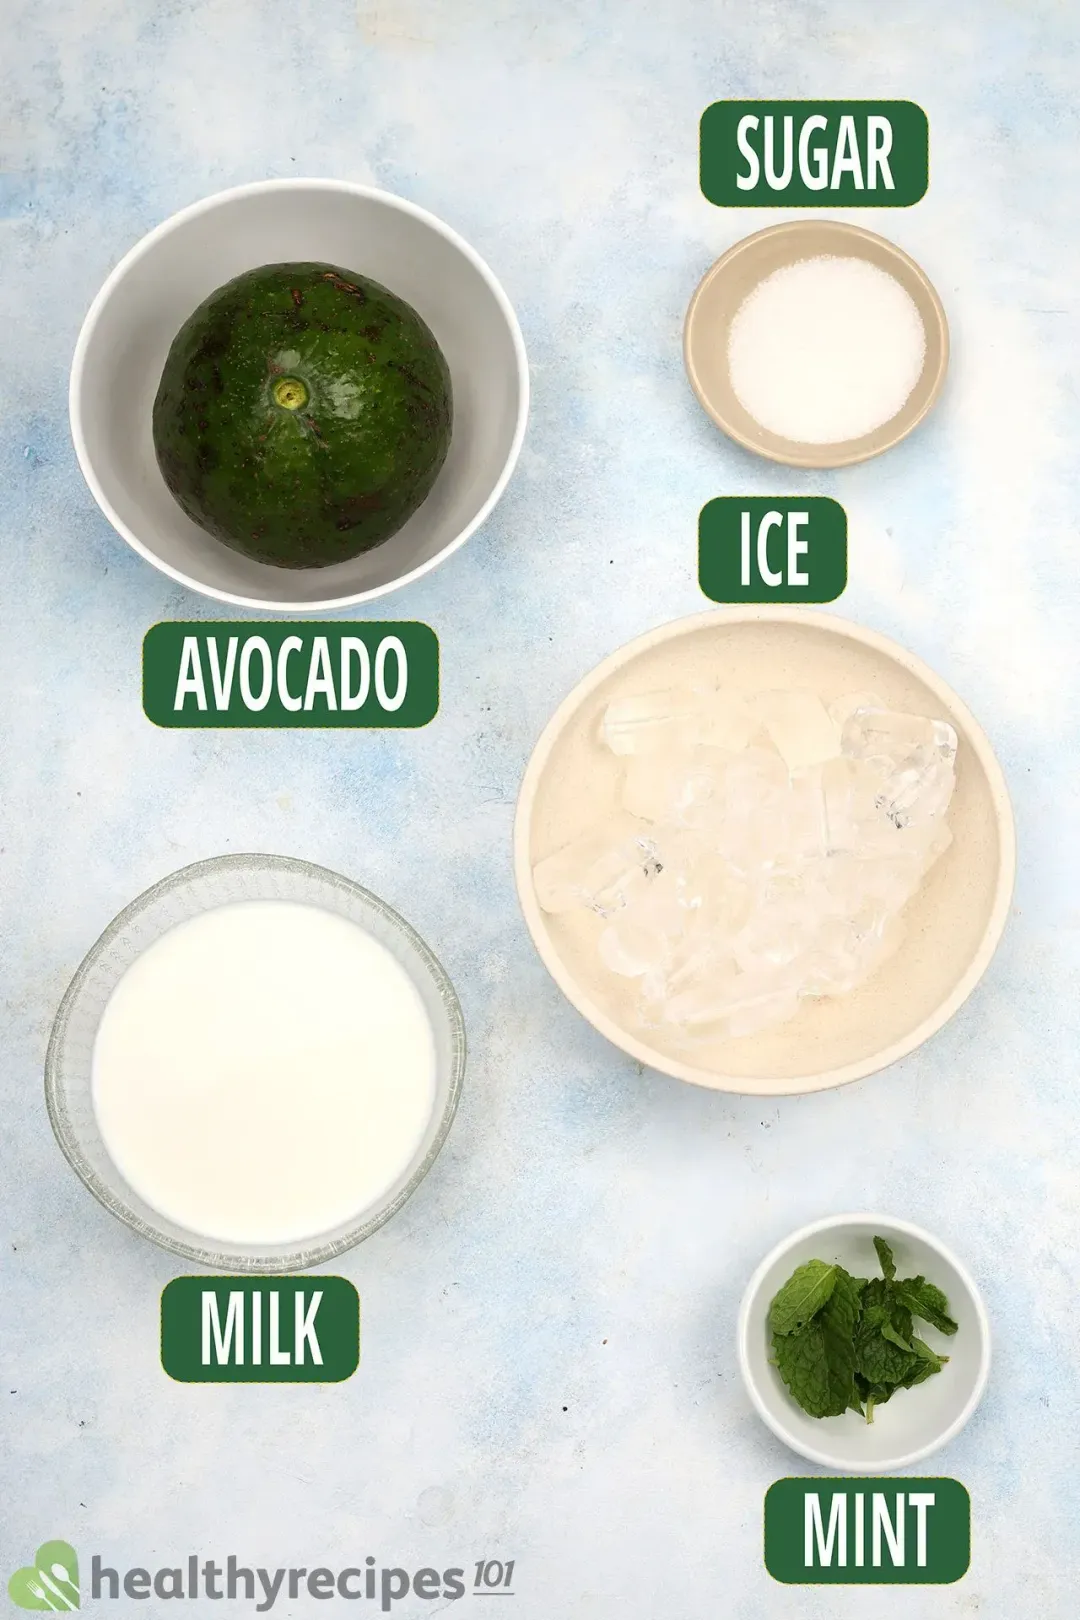 ingredients for Avocado Smoothie